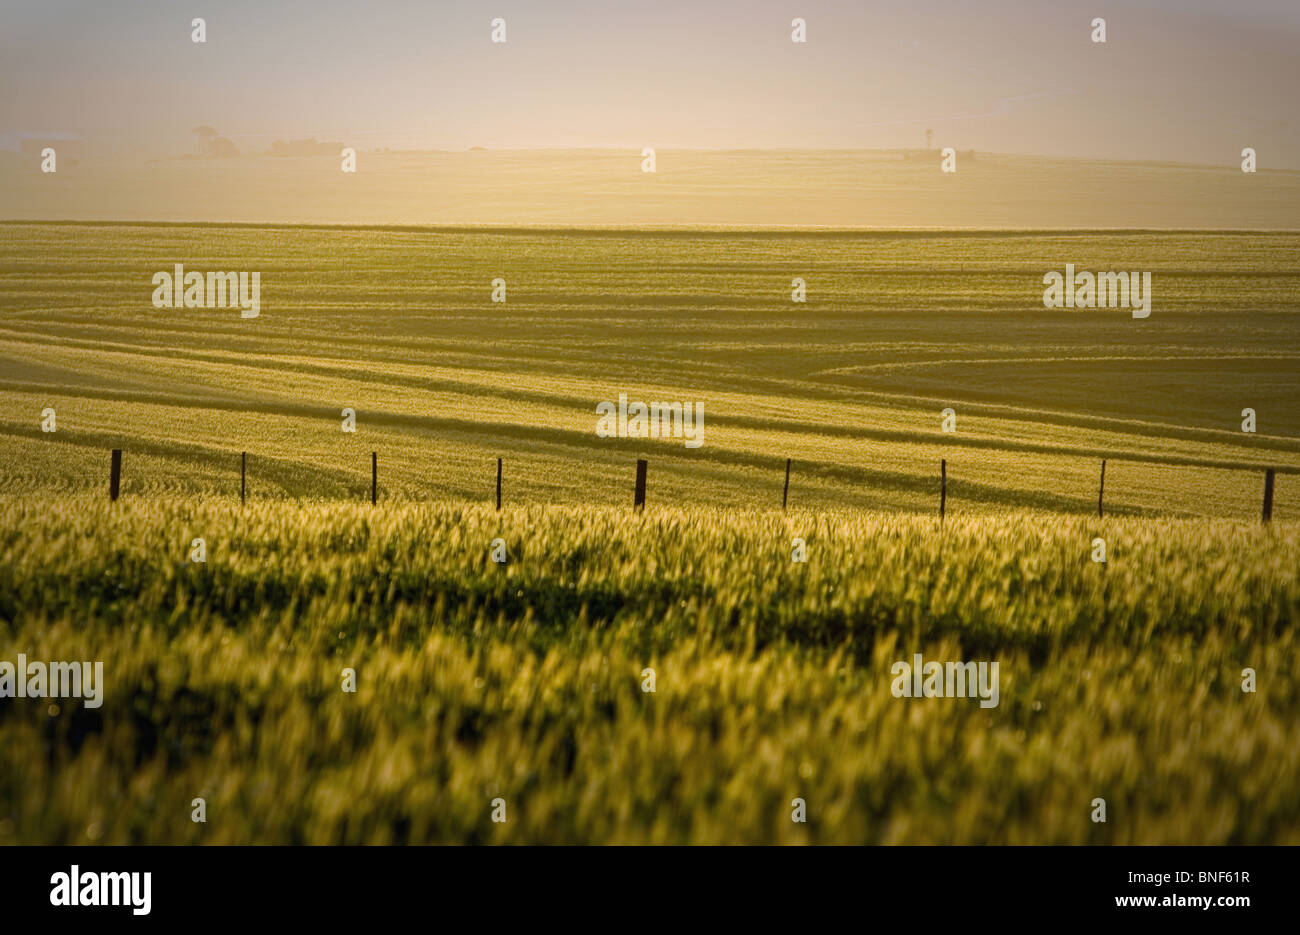 Distant wheatfields with misty background and fence, Durbanville, Western Cape Province, South Africa Stock Photo